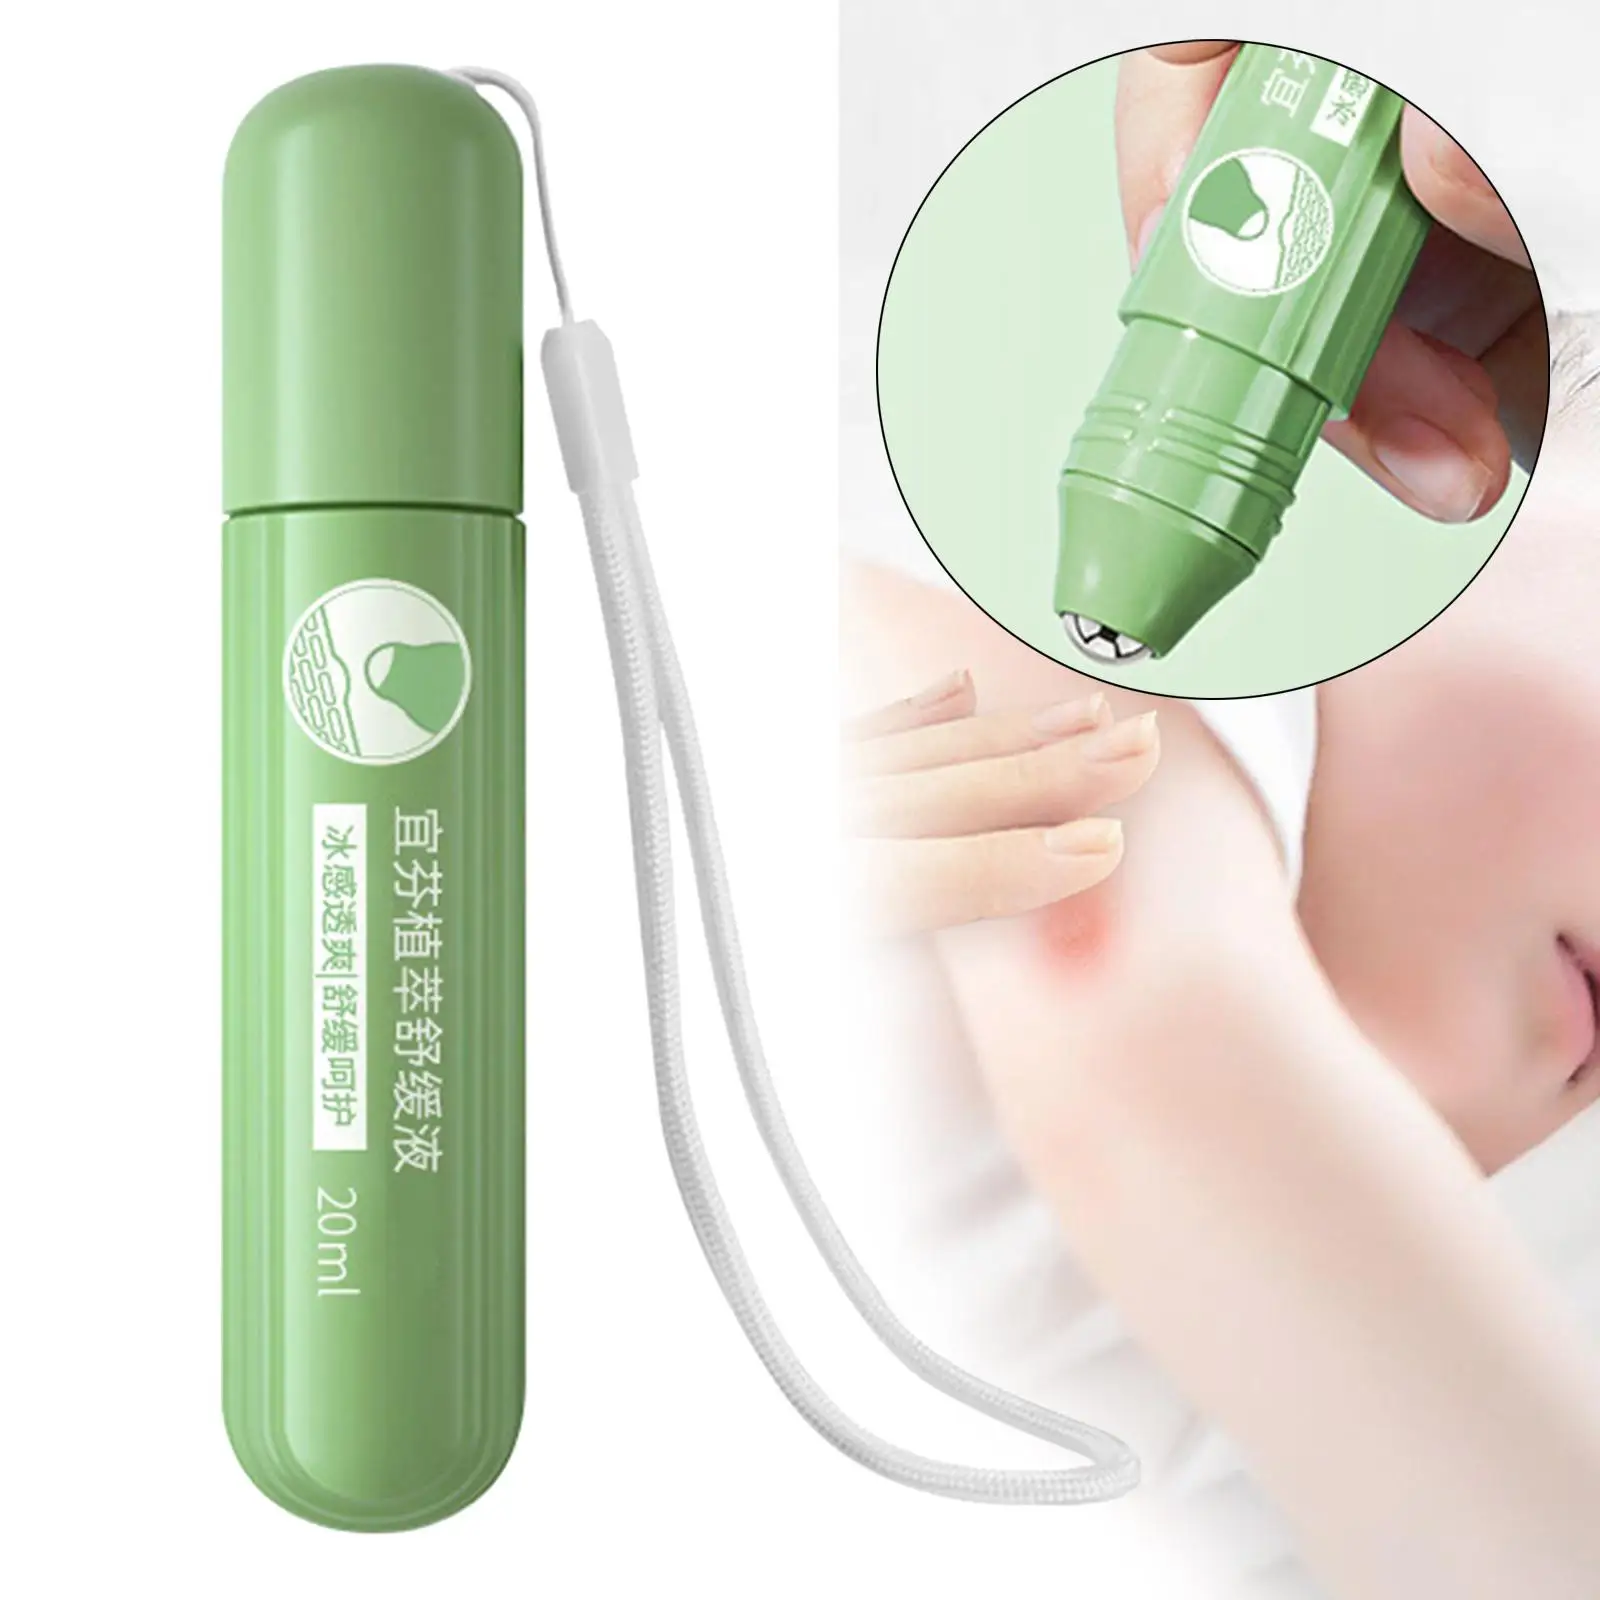 Multifunctional Bites Soothing Stick Itching Multifunctional Repellant for Sleeping Travel